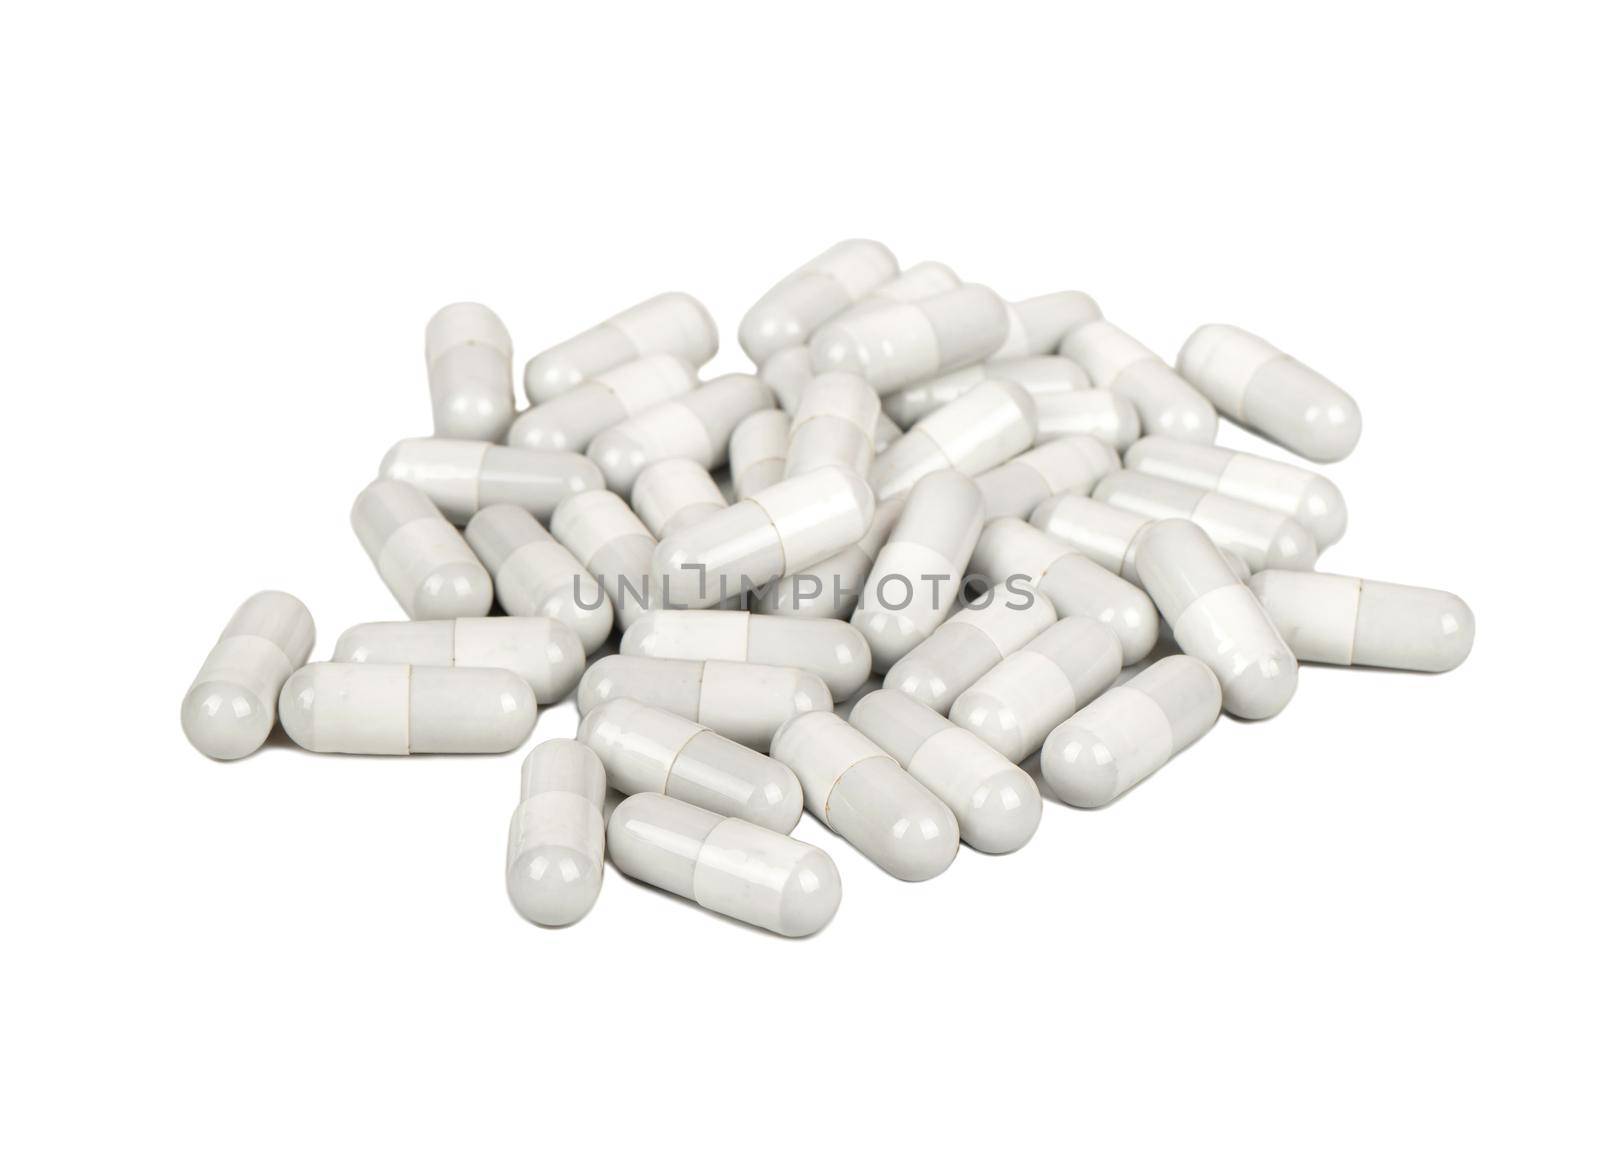 Pile of scattered gray capsules on a white background